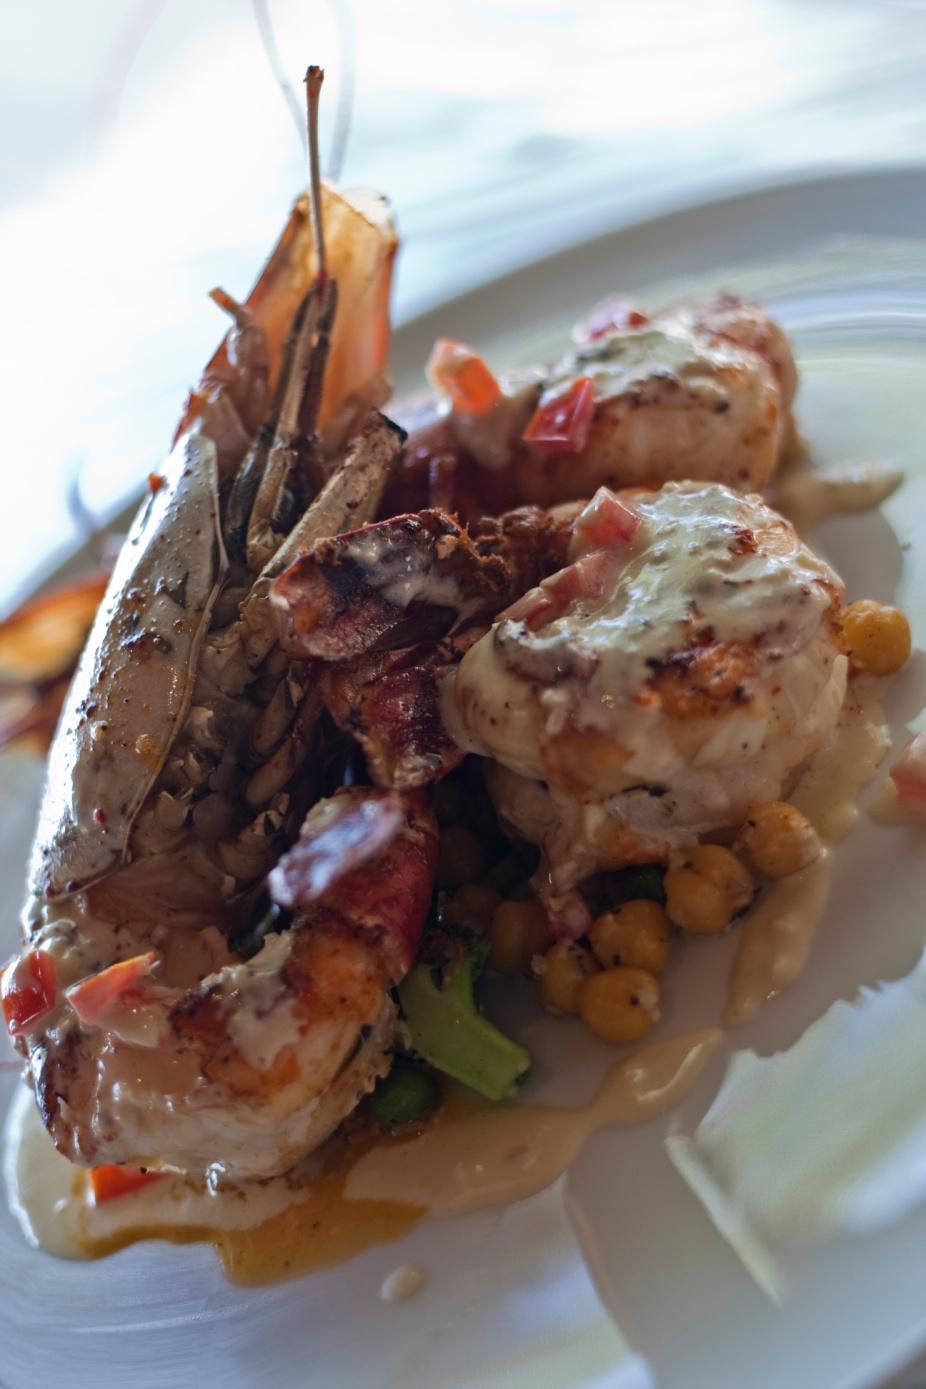 BACK TO FROM THE SEA SIMPLY GRILLED SRI LANKAN WATER PRAWNS